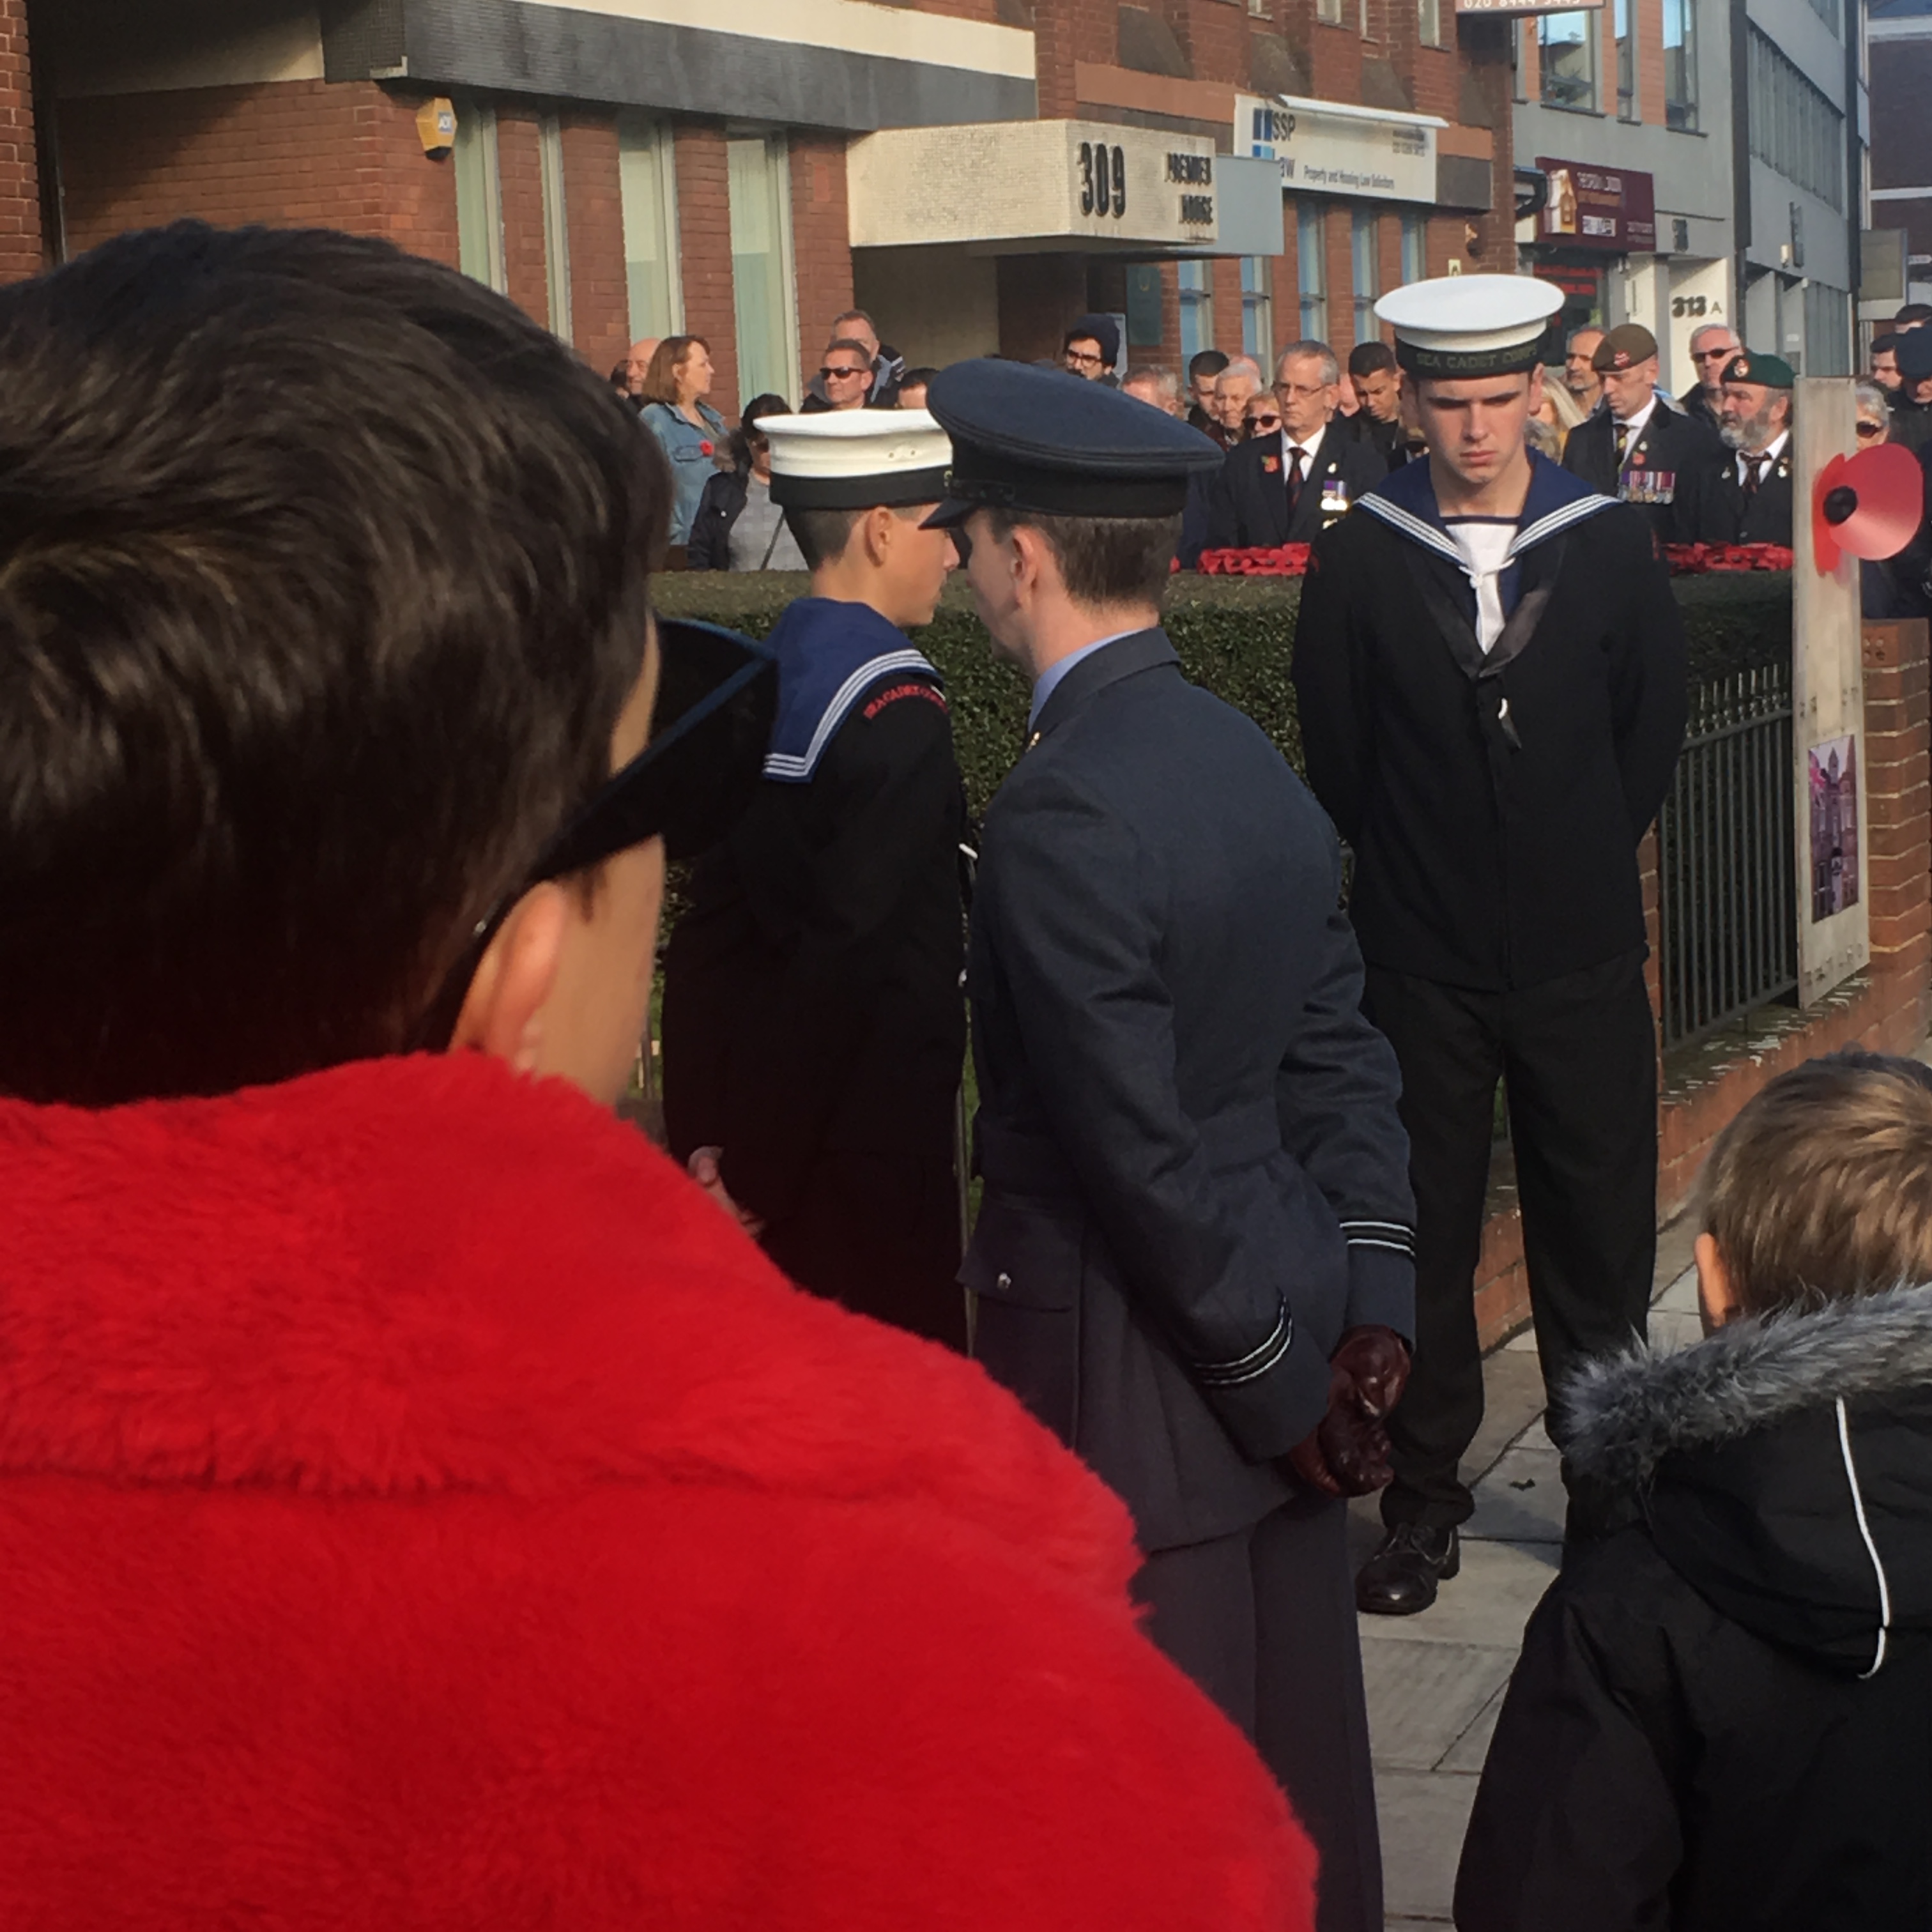 Finchley War Memorial remembrance service 2018